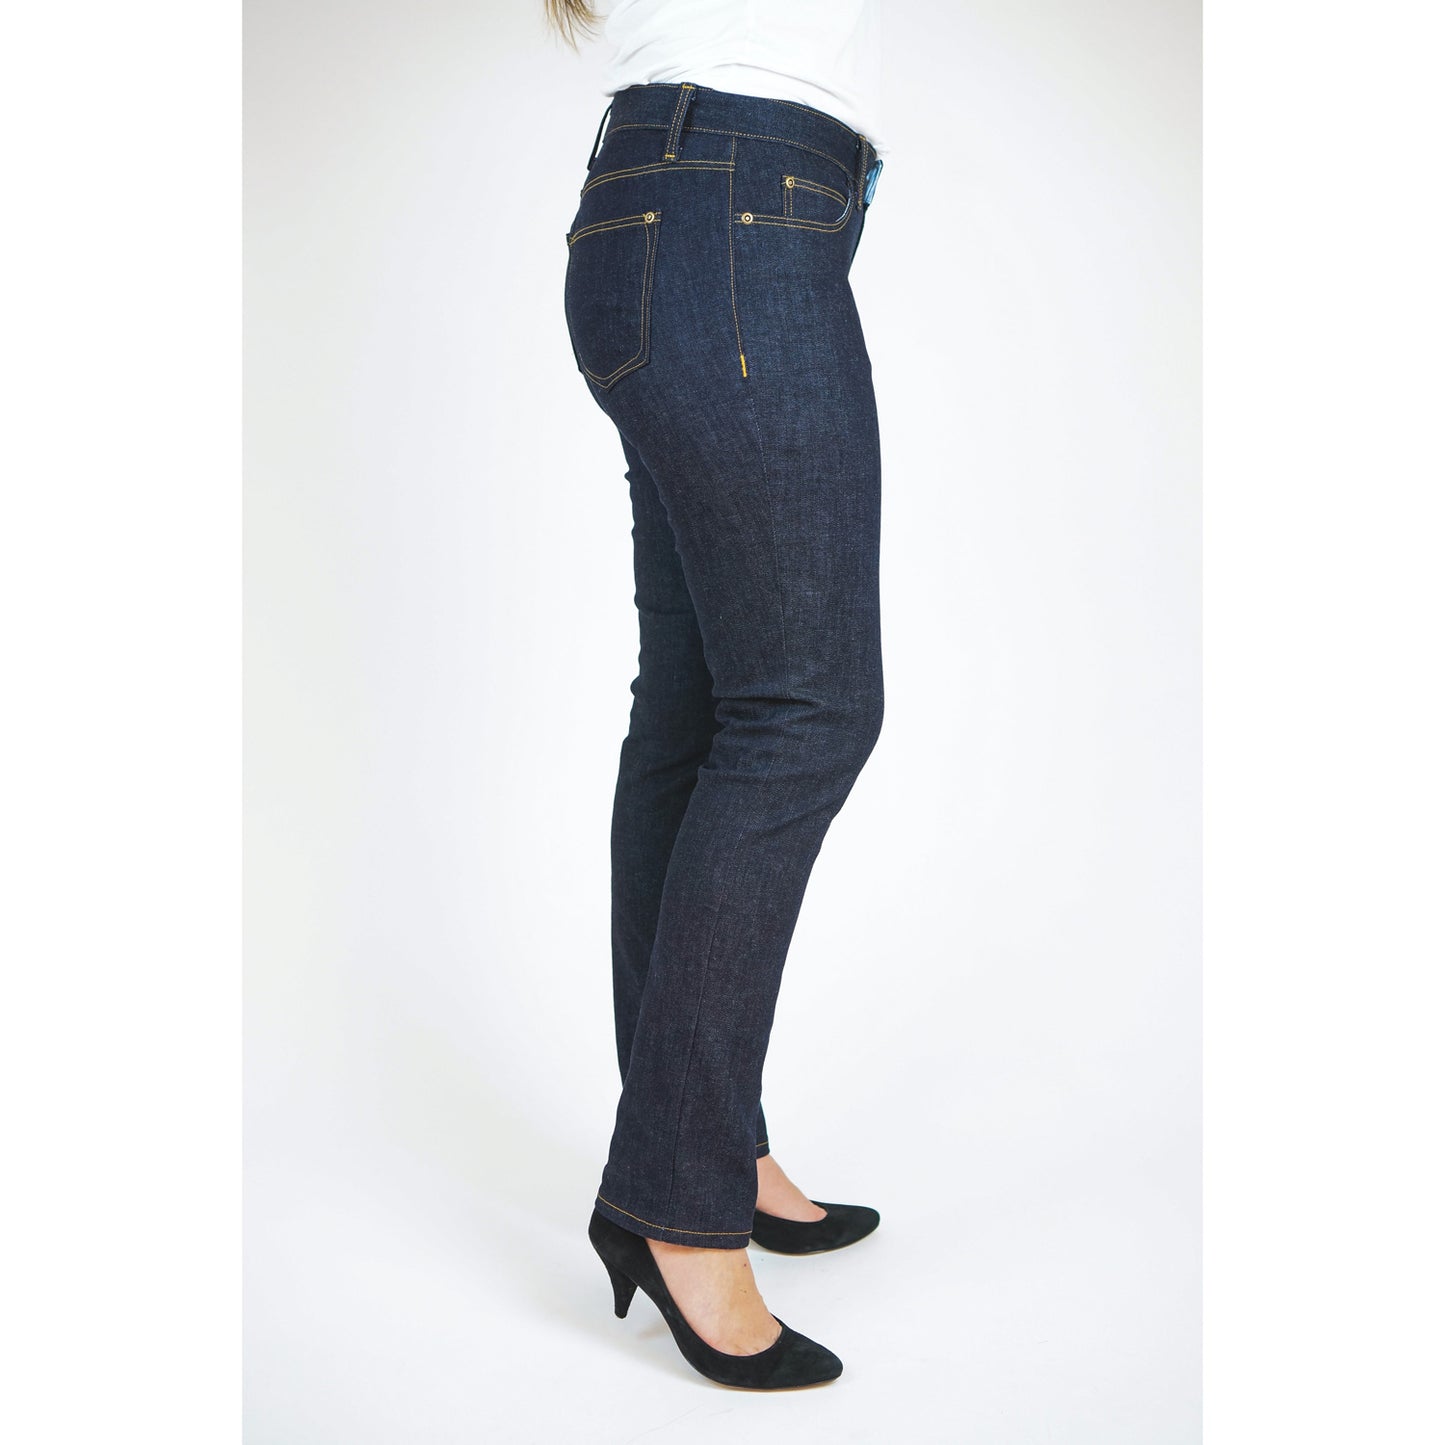 Ginger Jeans Sewing Pattern - Closet Core Patterns